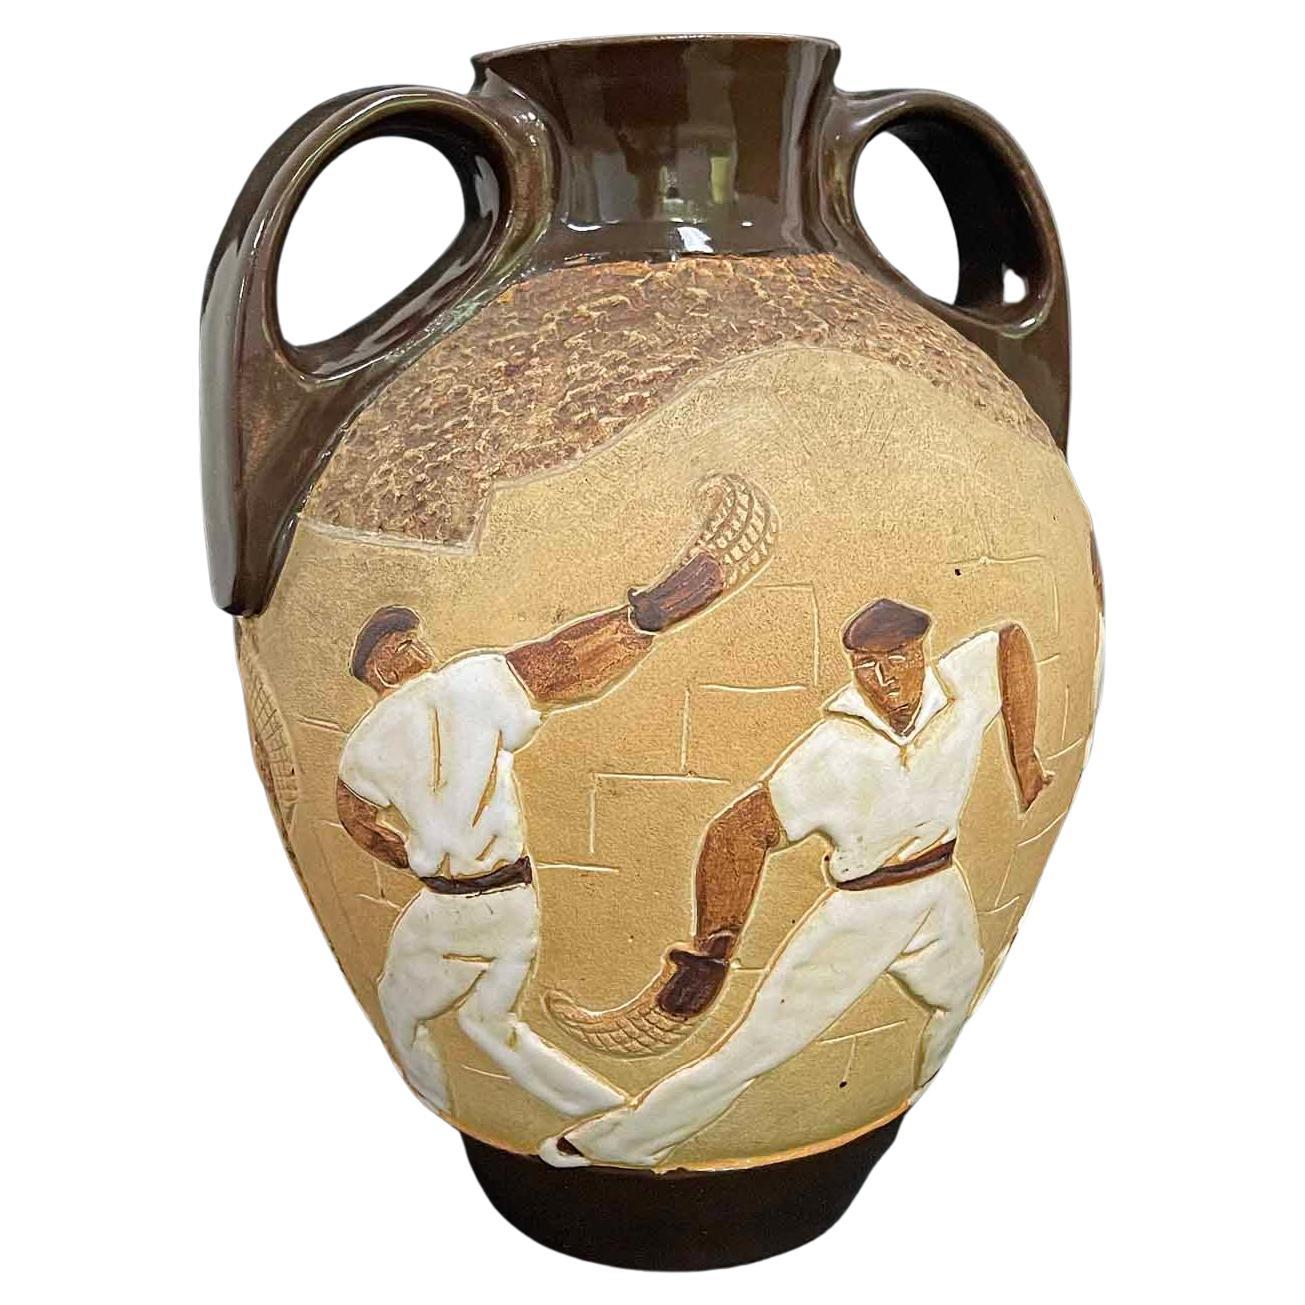 "Playing Pelota in the Basque Region", Exceptional Art Deco Vase by Ciboure